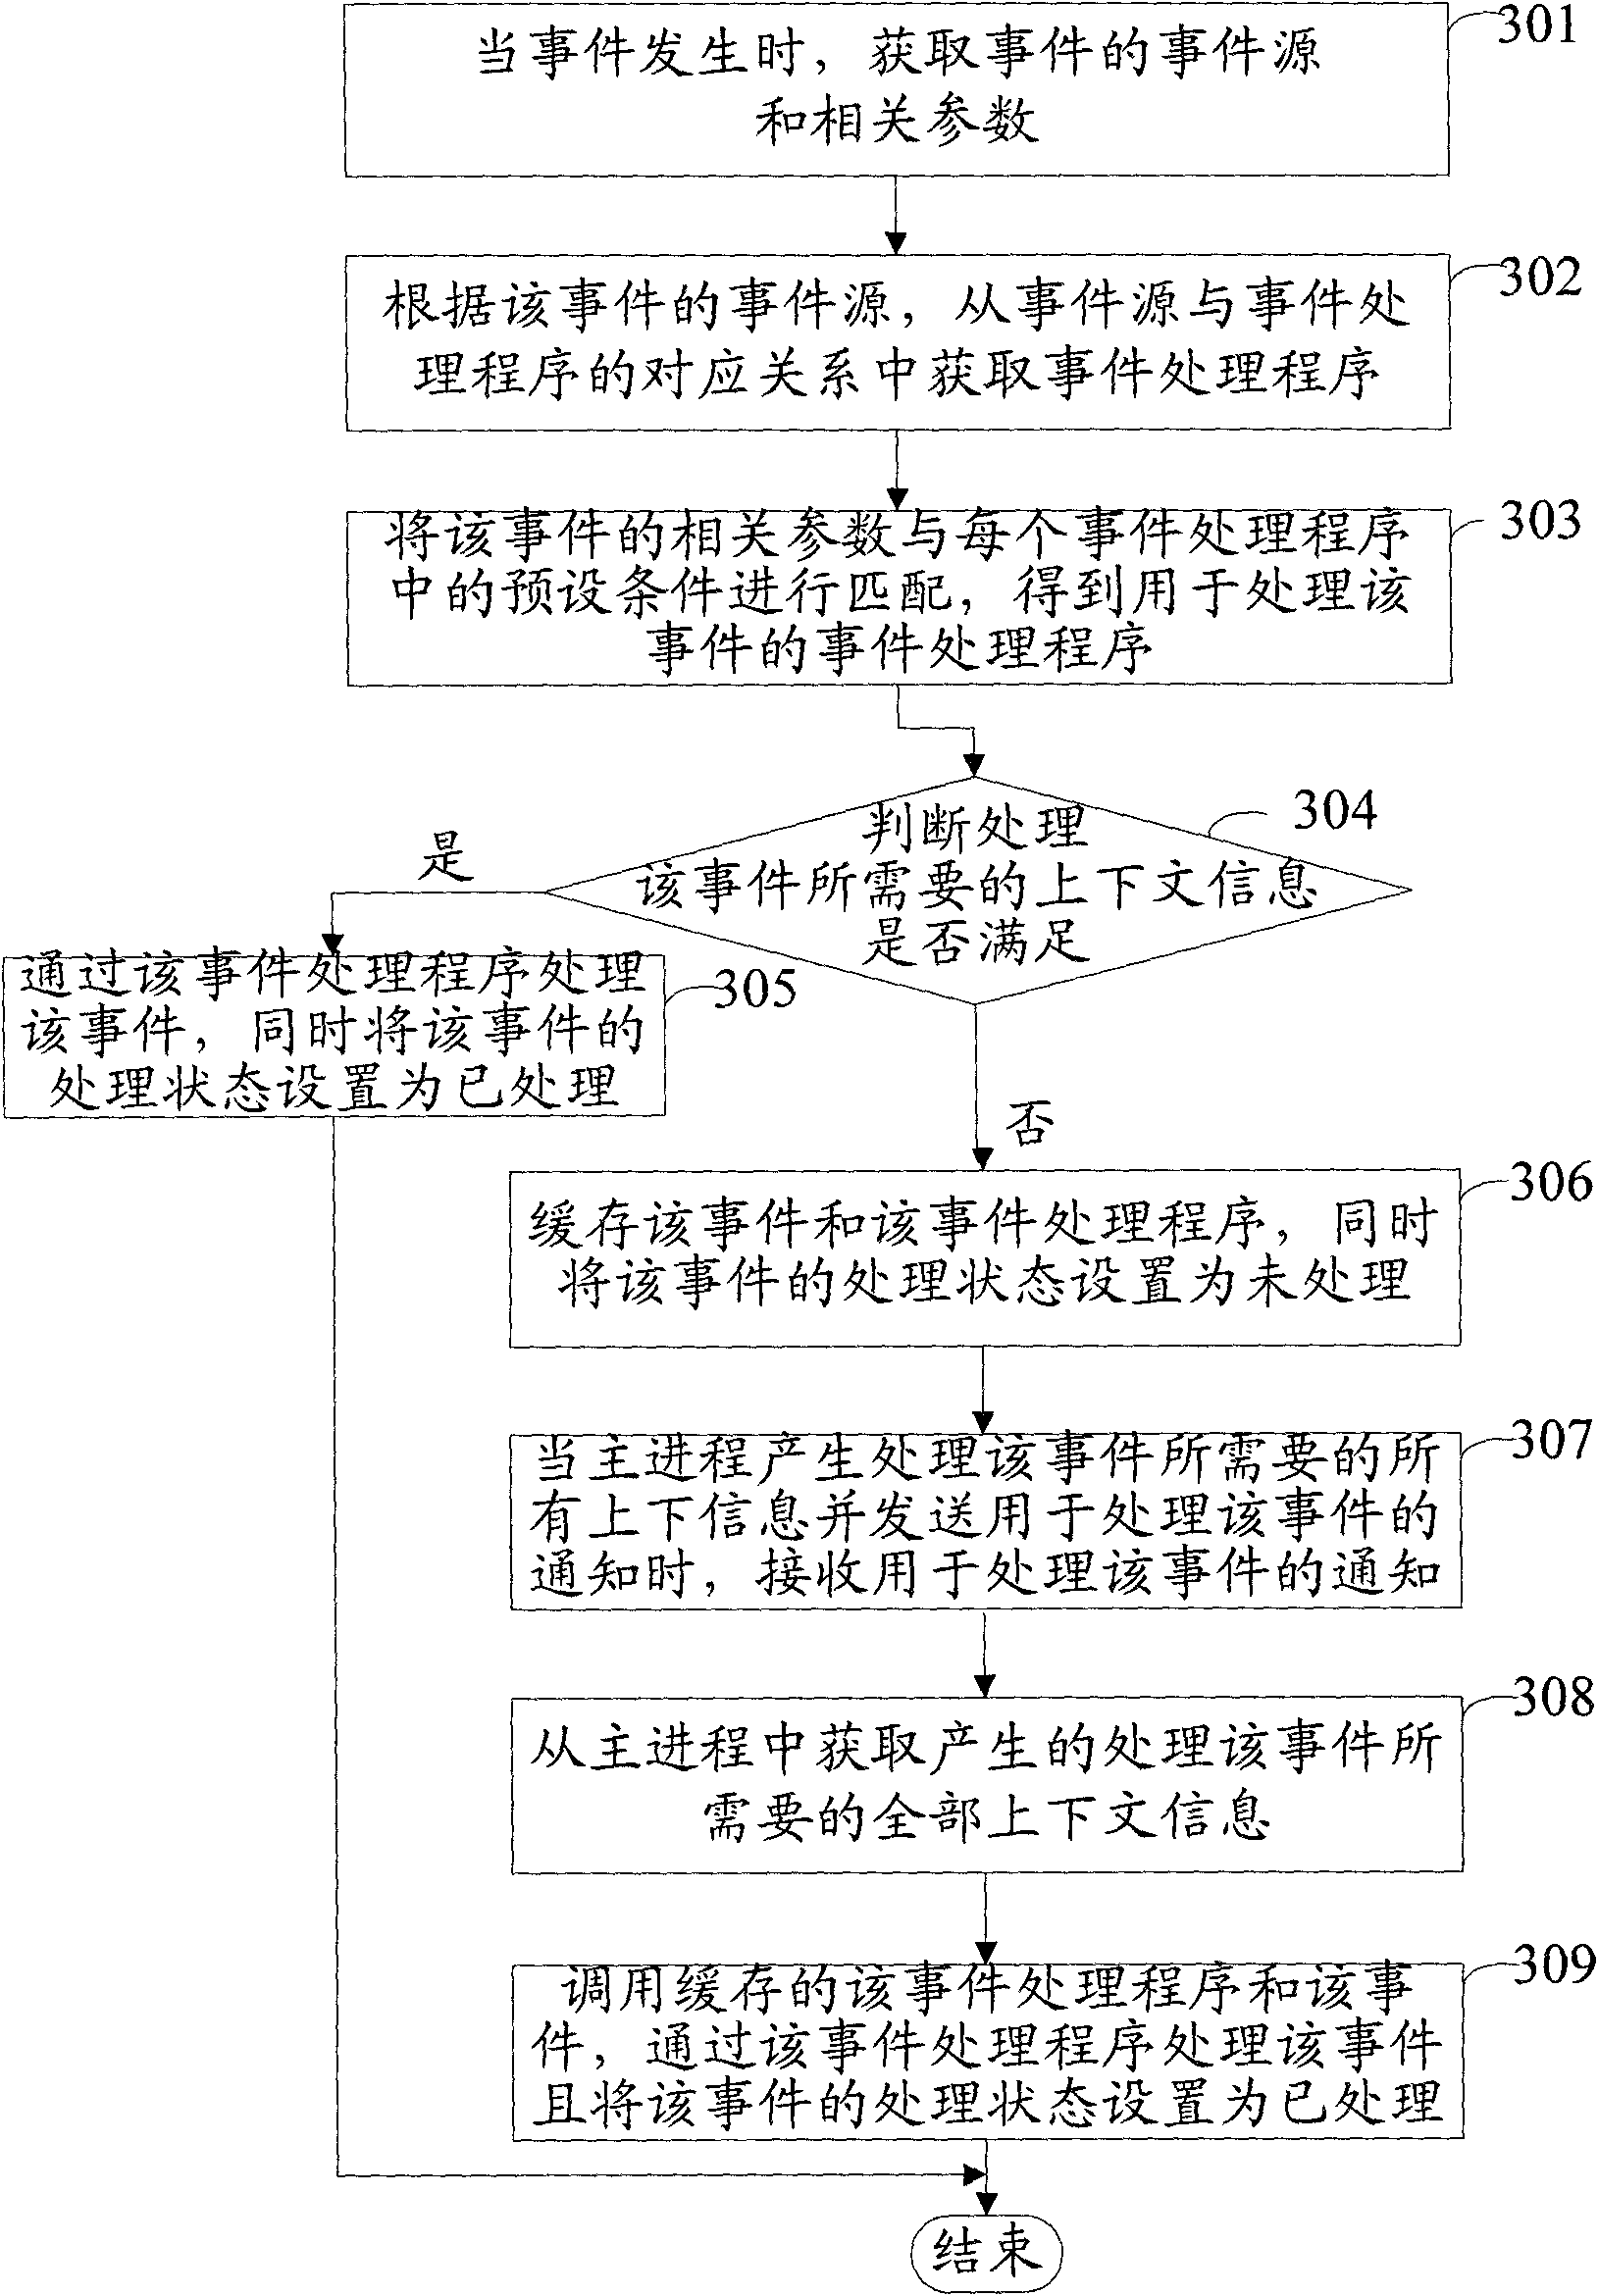 Method and device for handling events